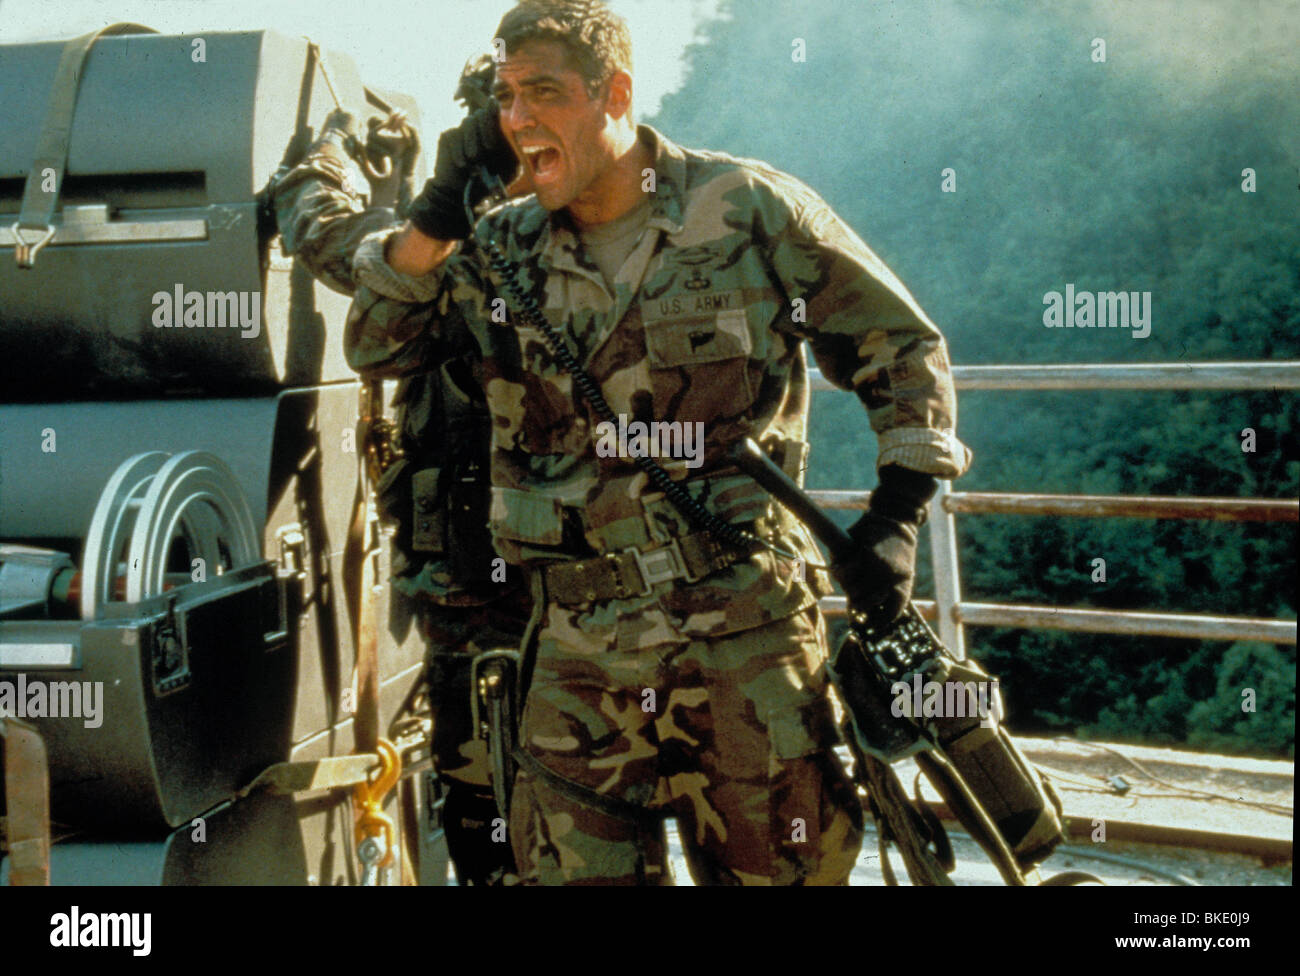 THE PEACEMAKER (1997) GEORGE CLOONEY PEAC 030 Stock Photo